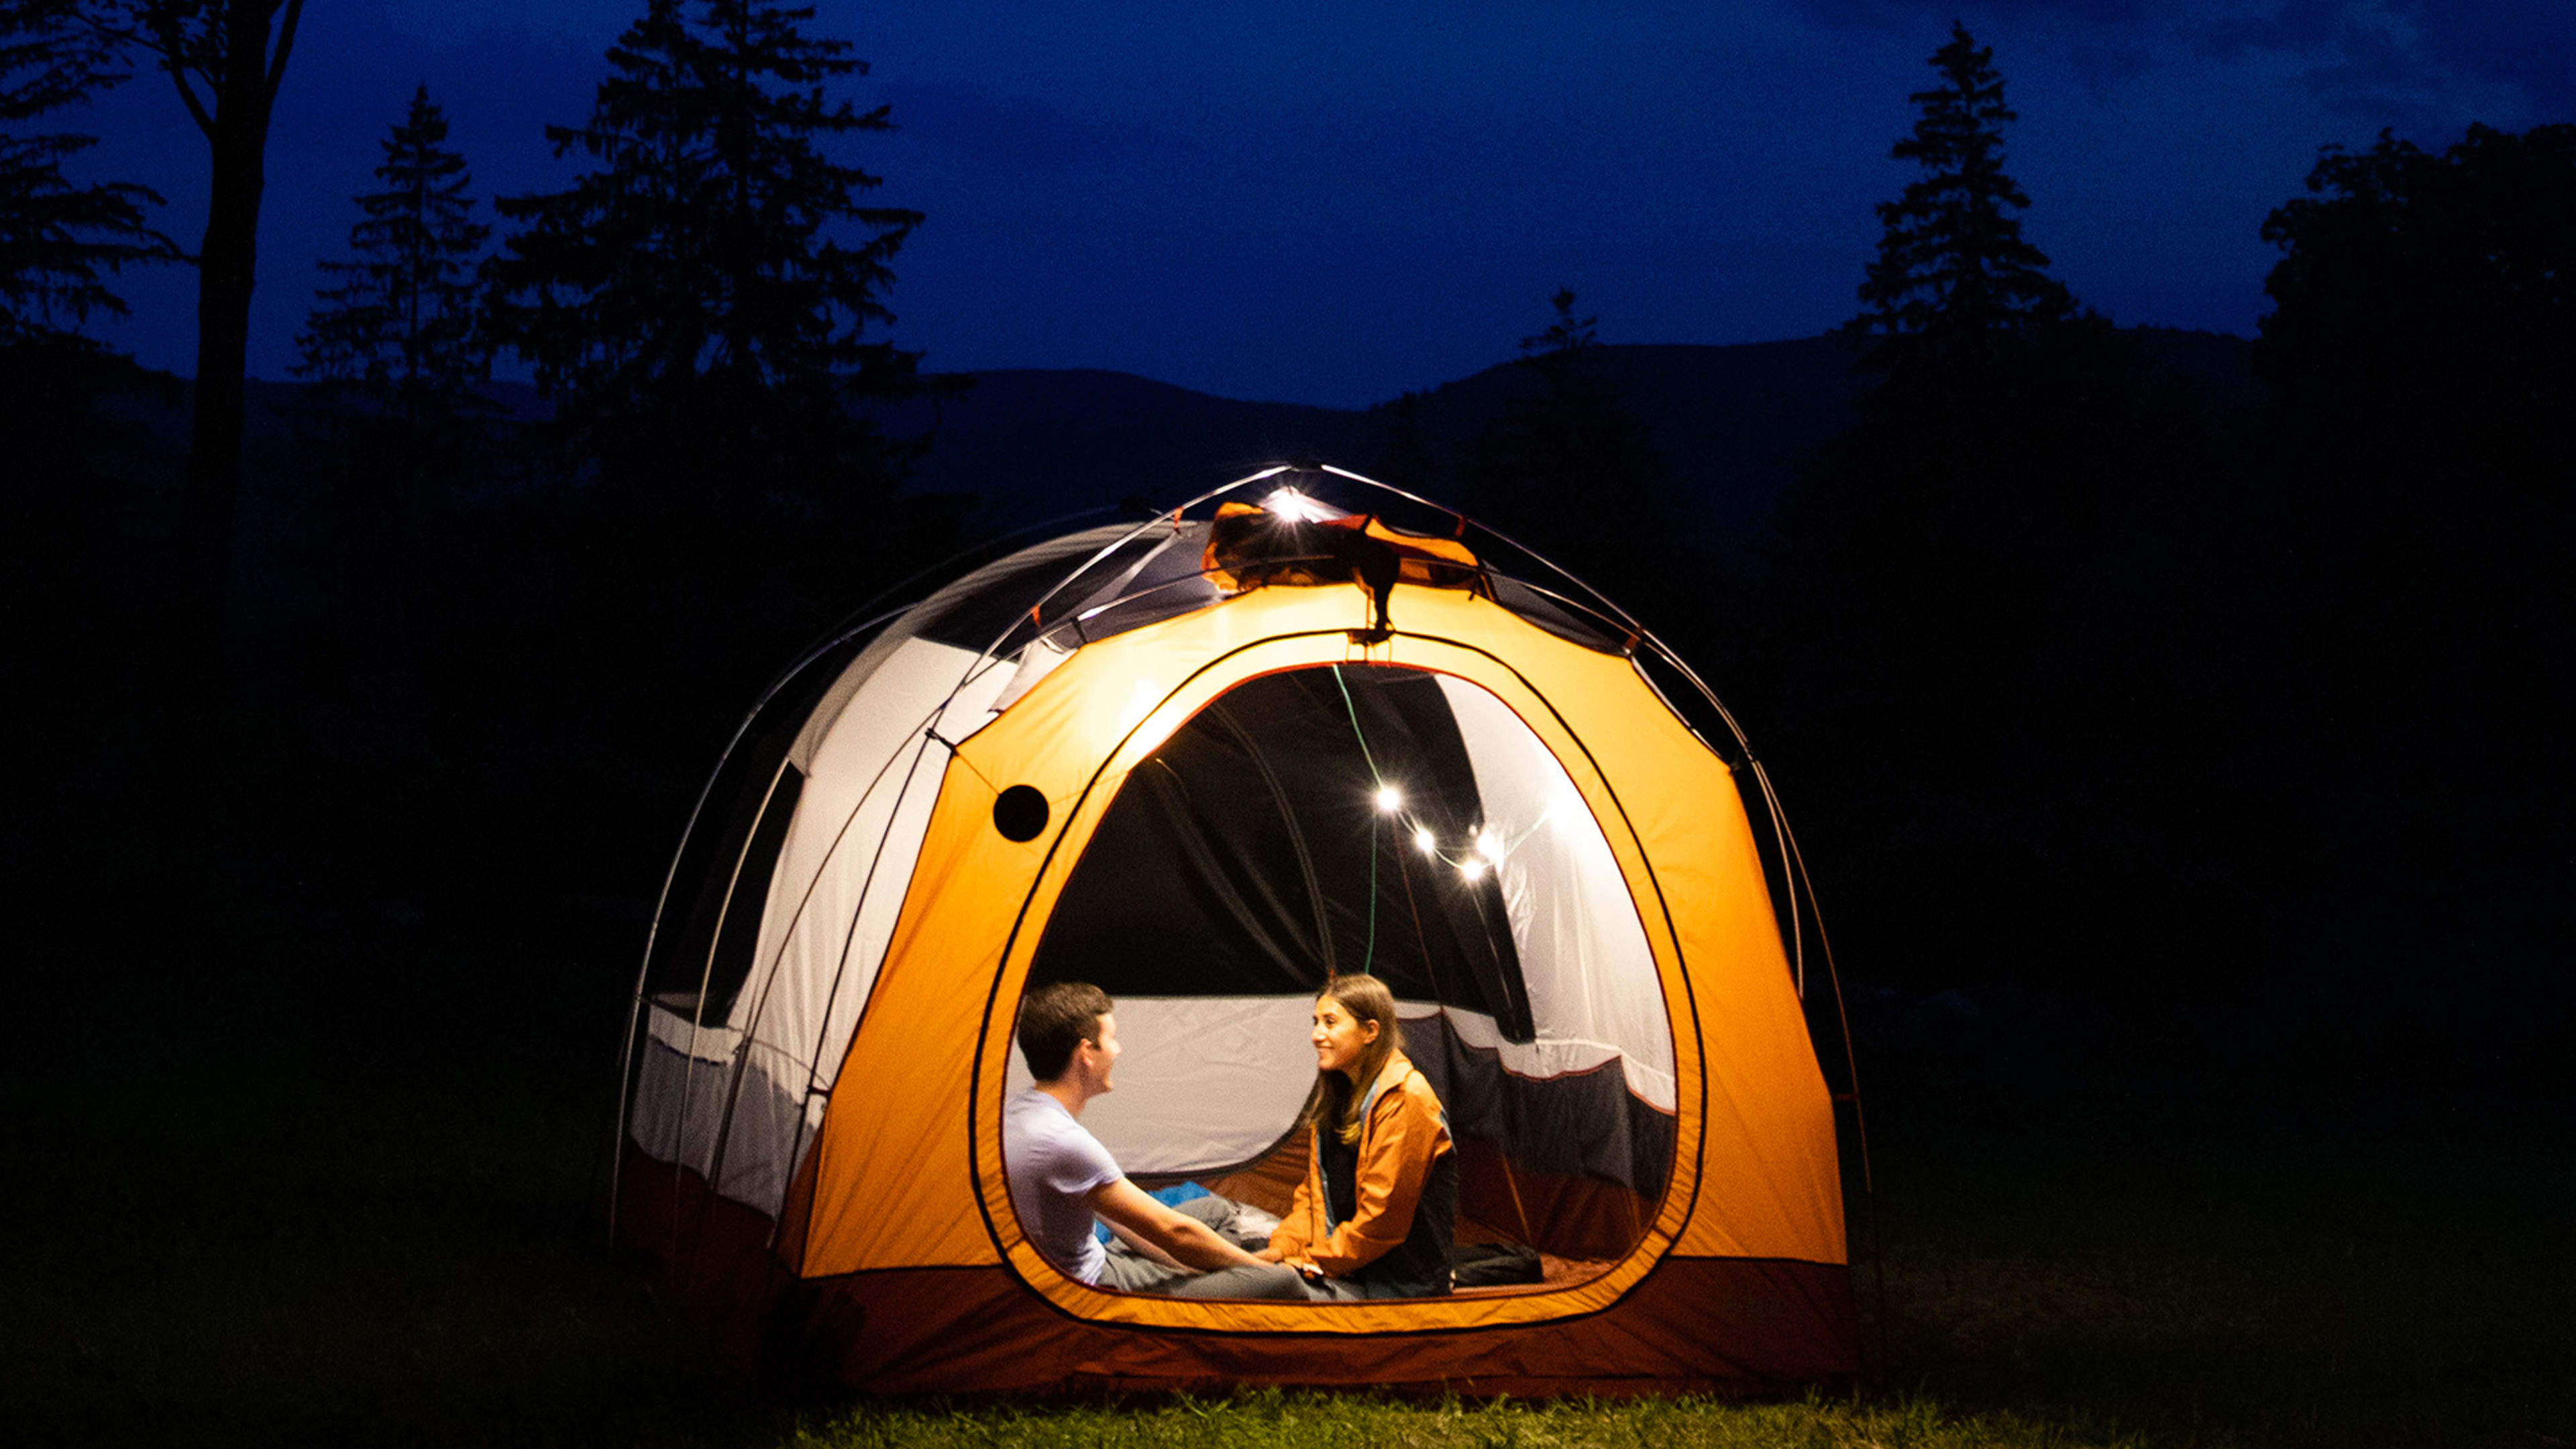 These solar-powered string lights are the best piece of camping equipment I own